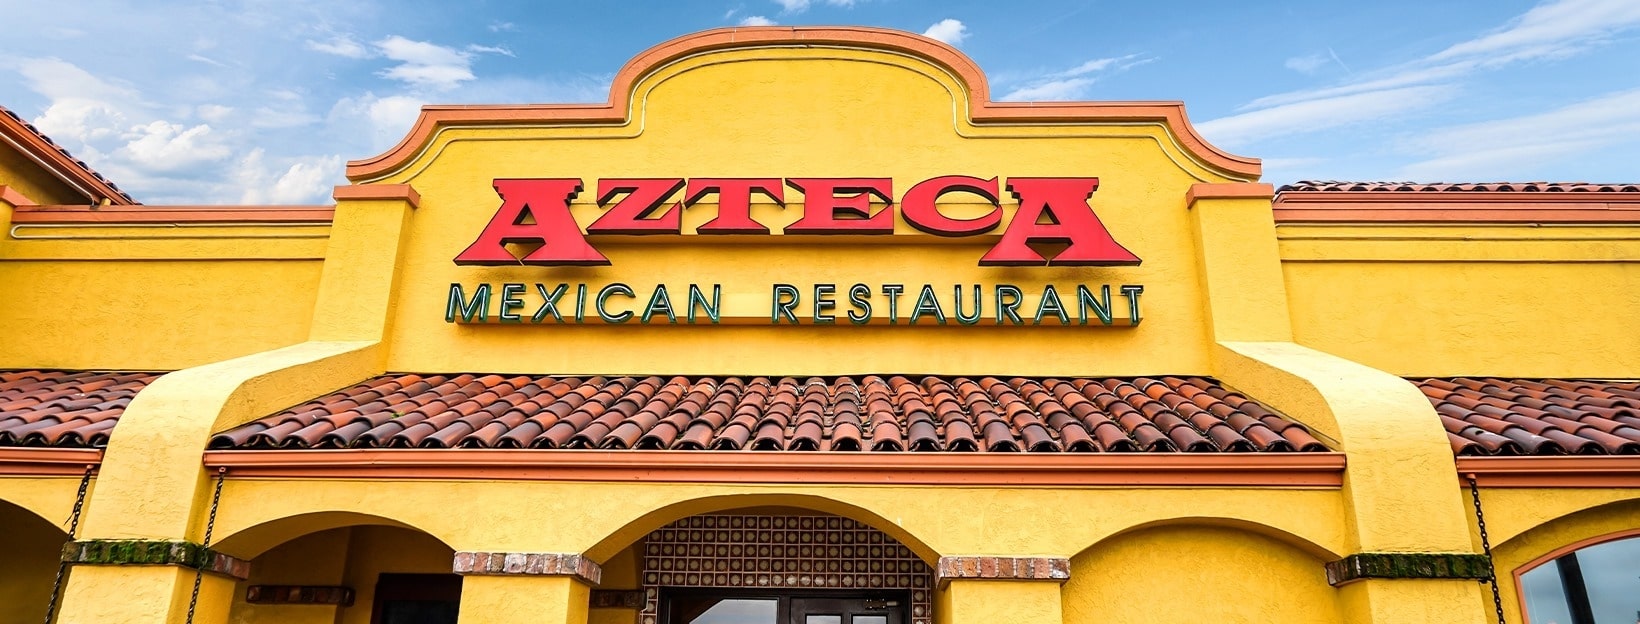 Azteca menu prices featuring 127 items ranging from $4.00 to $38.00